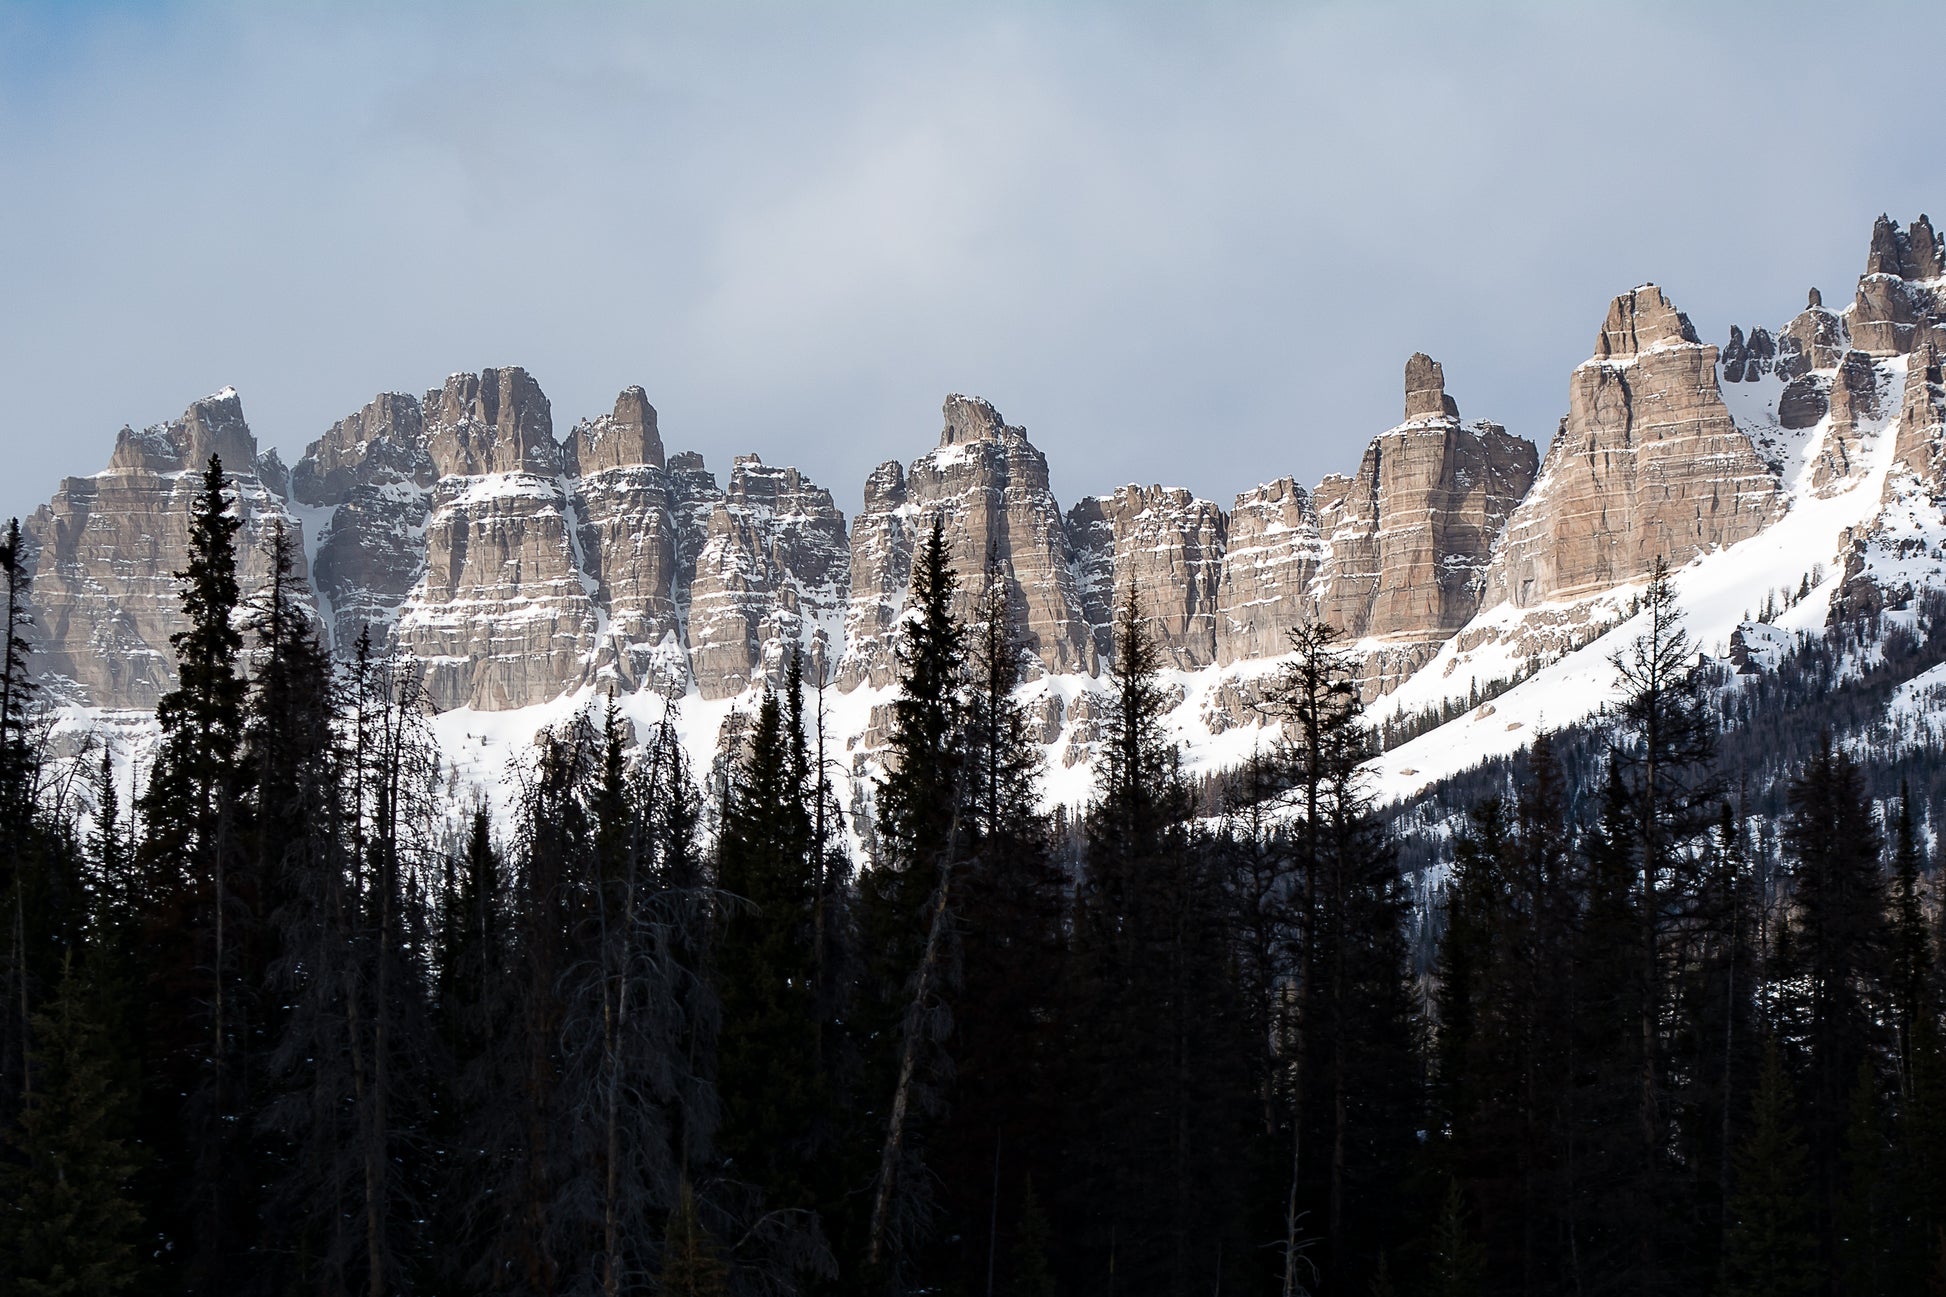 Sentinels in Winter Photography Photographer: Carol Westbrook Photo on Metal of the Sentinels on Togwotee Pass  (Breccia Cliffs) outside of Dubois, Wyoming  Winter scene  Photo on Metal  30" x 16"  Black Aluminum Mount        Laramie Chamber Spring 2022 Exhibit